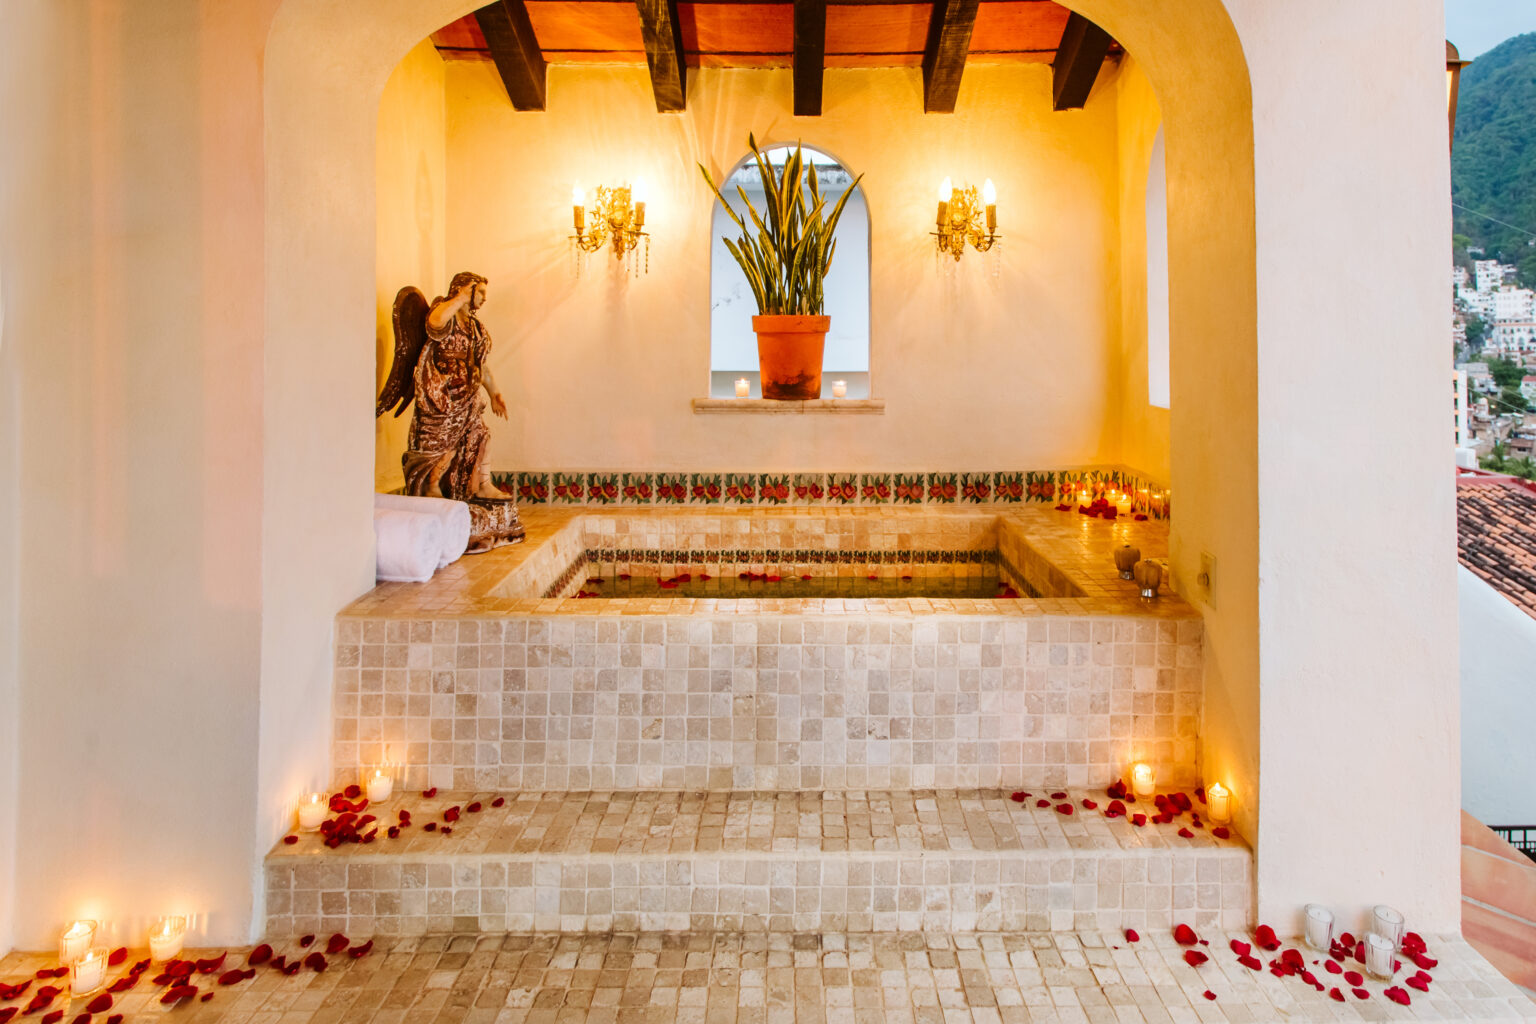 Hacienda San Angel's San Miguel Presidential Suite showcases a tiled jacuzzi on the terrace, adorned with rose petals and candles.